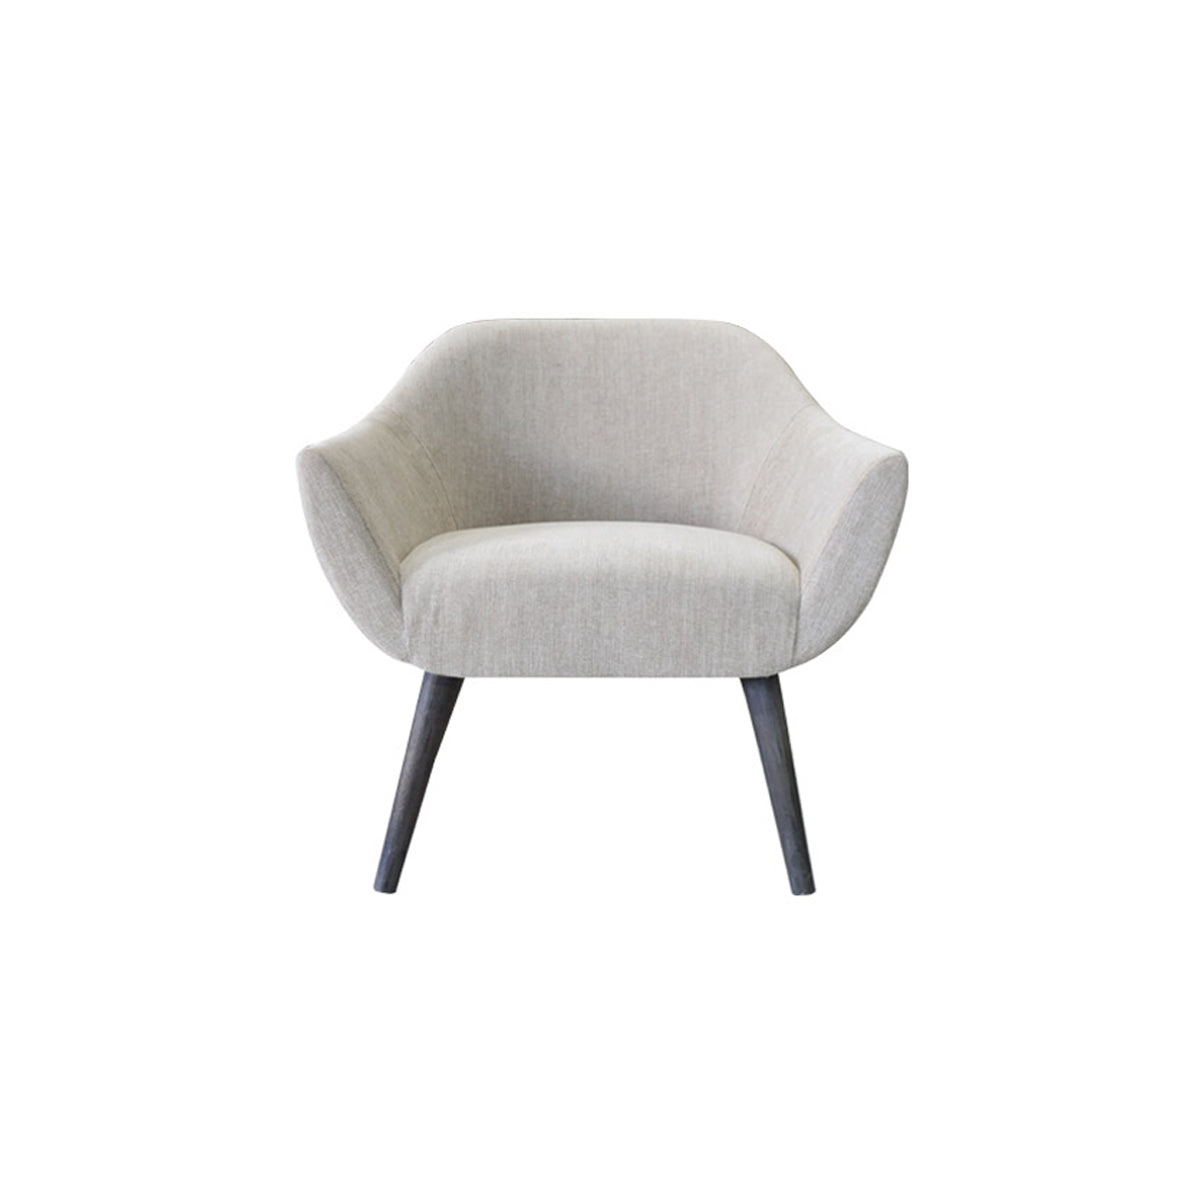 indonesia online furniture - lounge chair with slim tapered feet